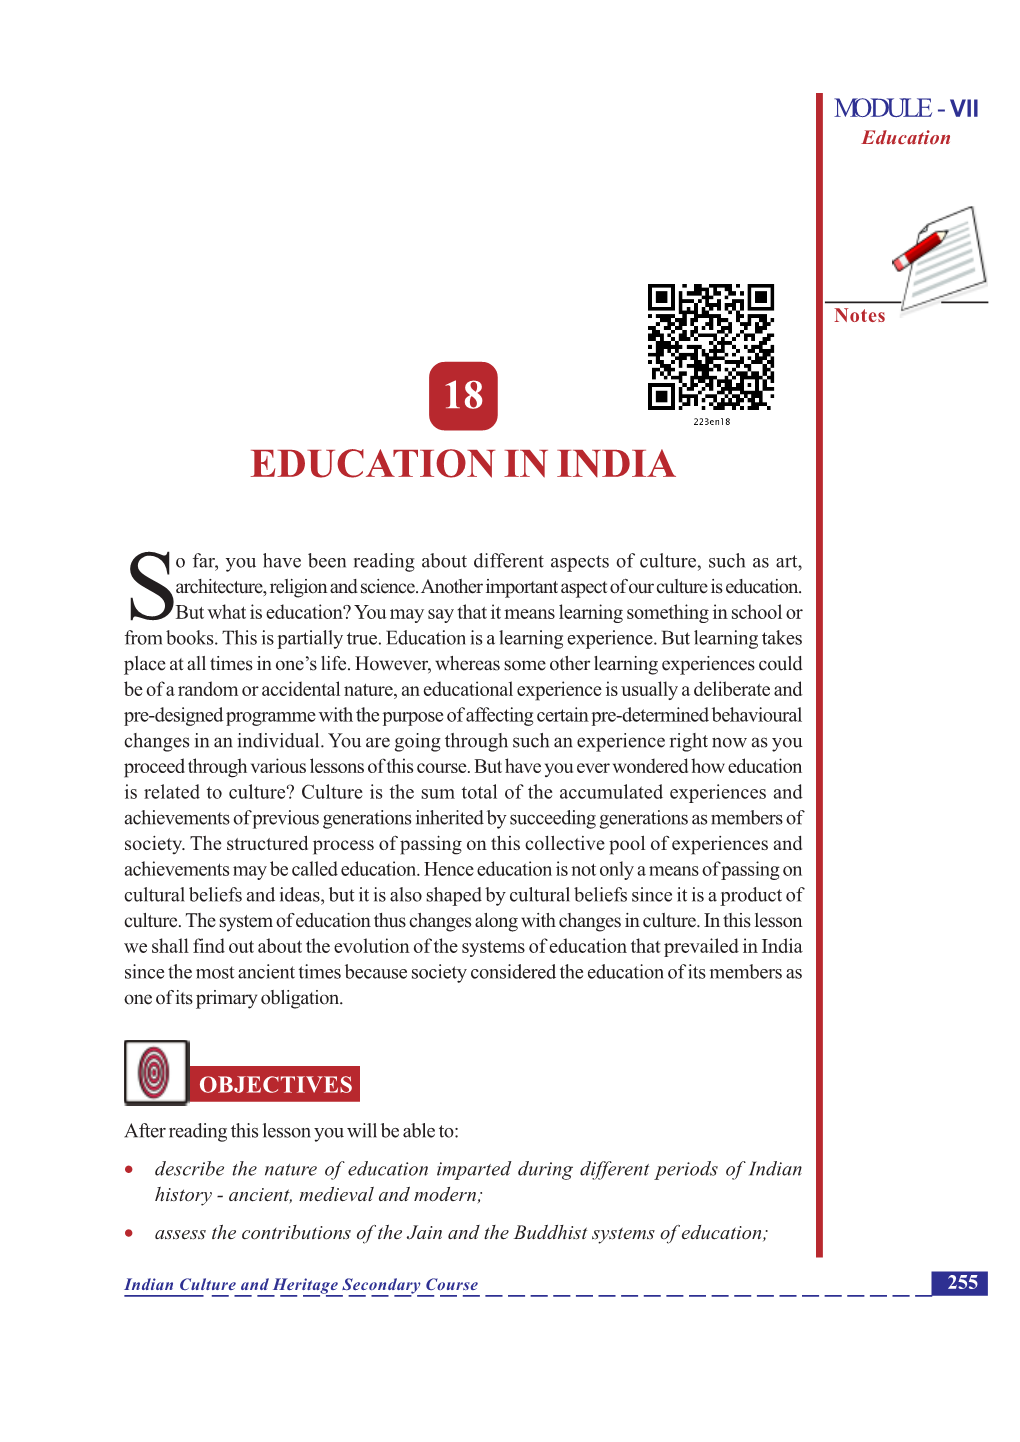 18. Education in India(5.9